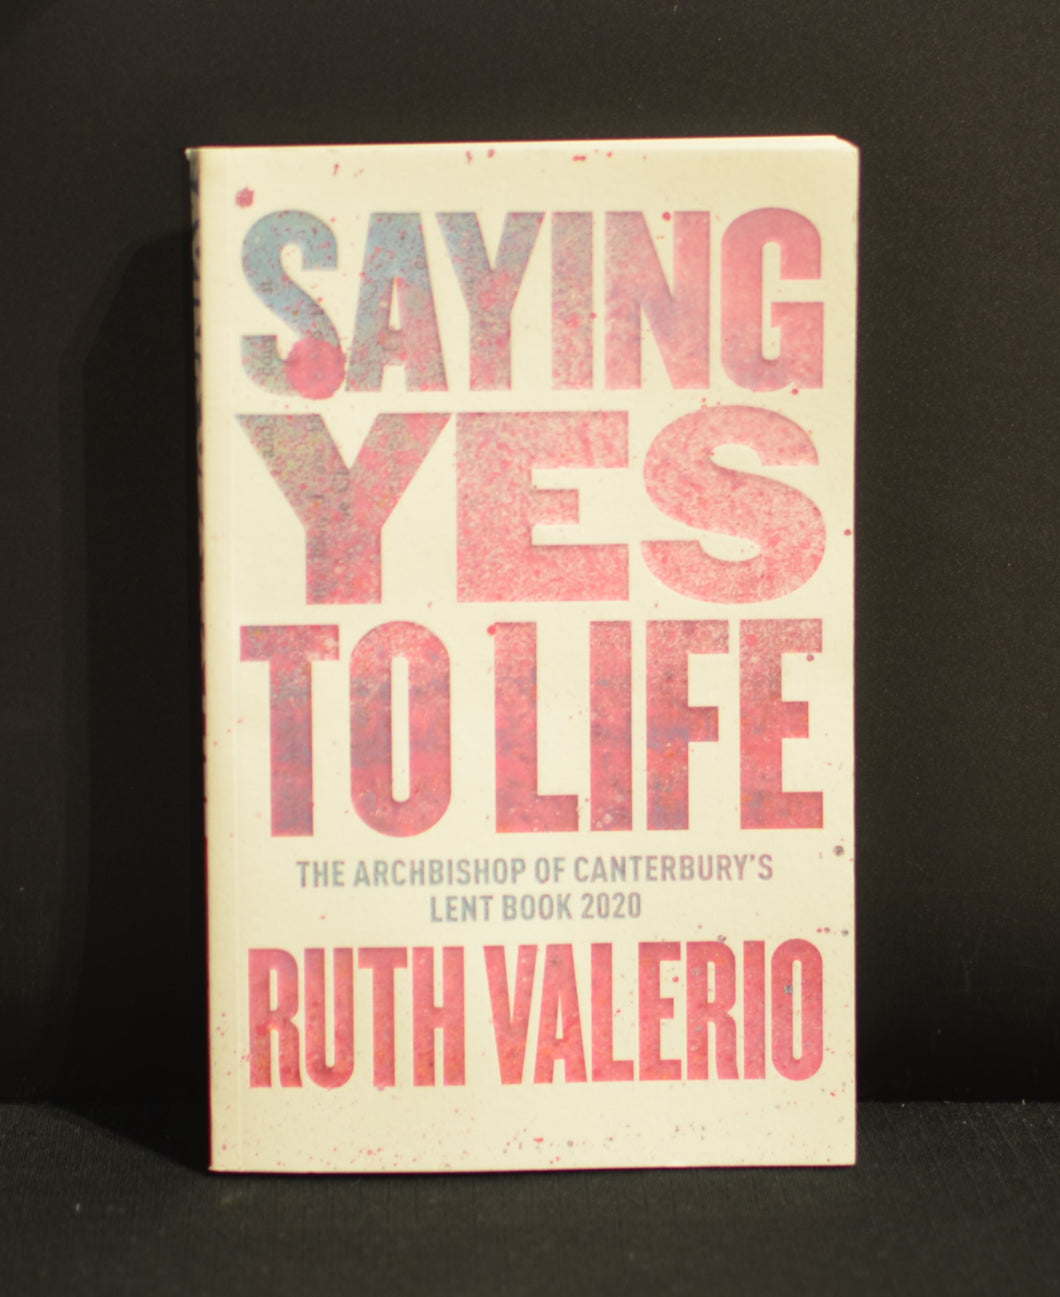 Saying Yes To Life -The Archbishop of Canterbury's Lent Book 2020